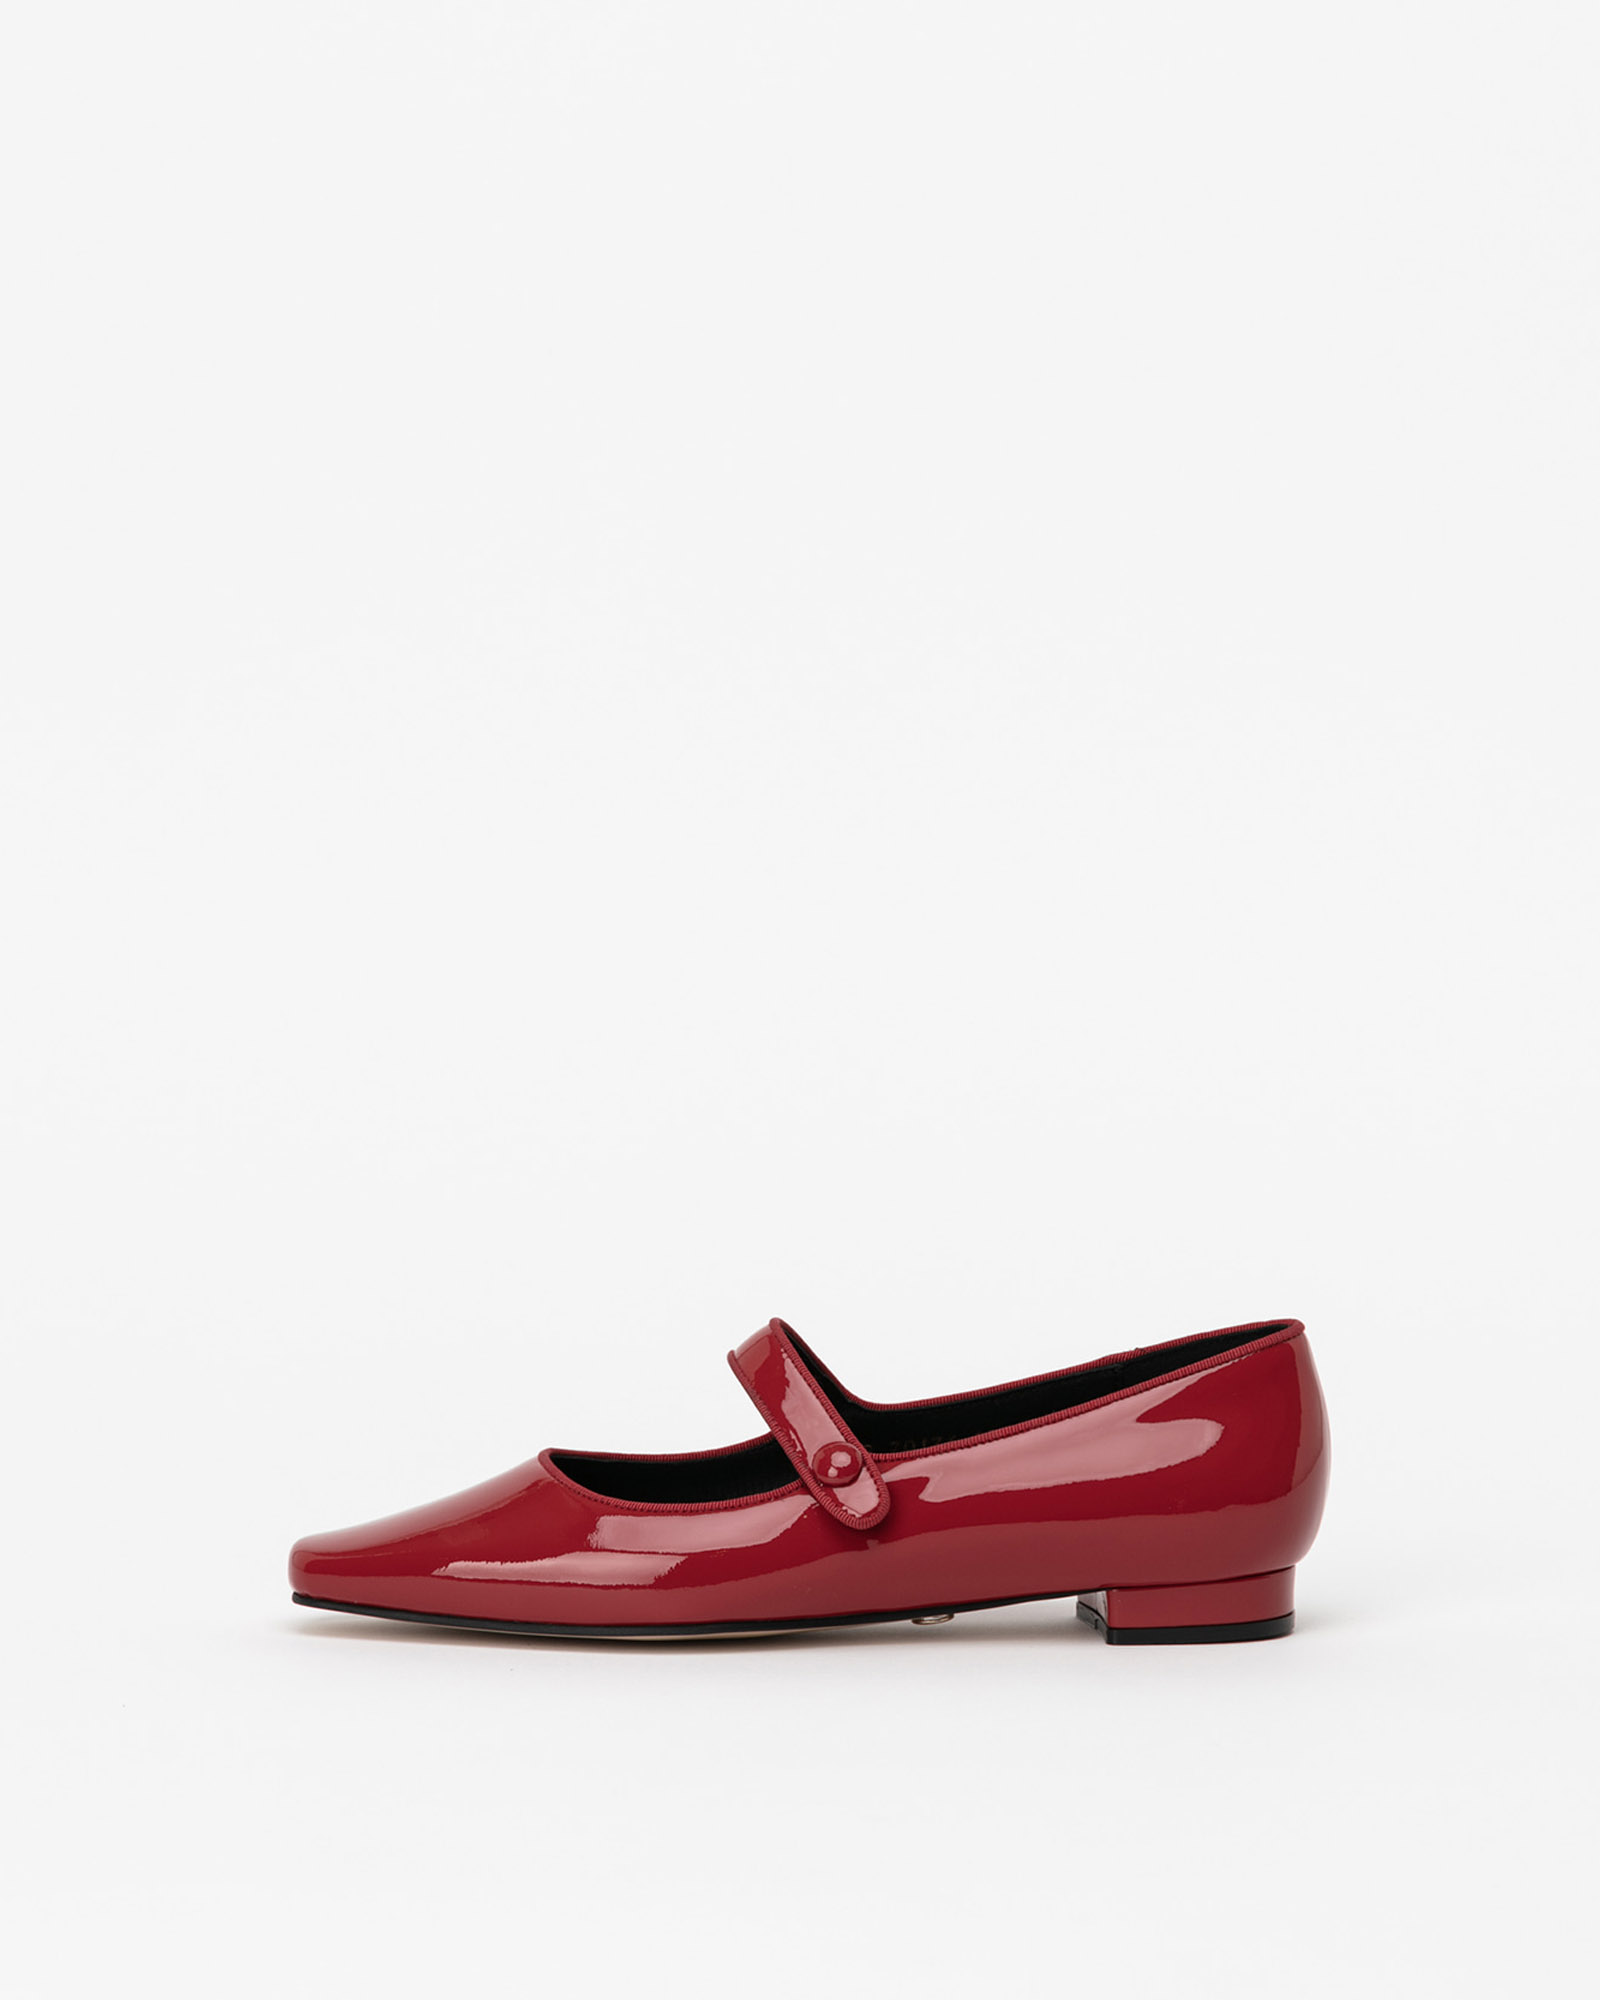 Clotte Maryjane Flats in  Red Patent